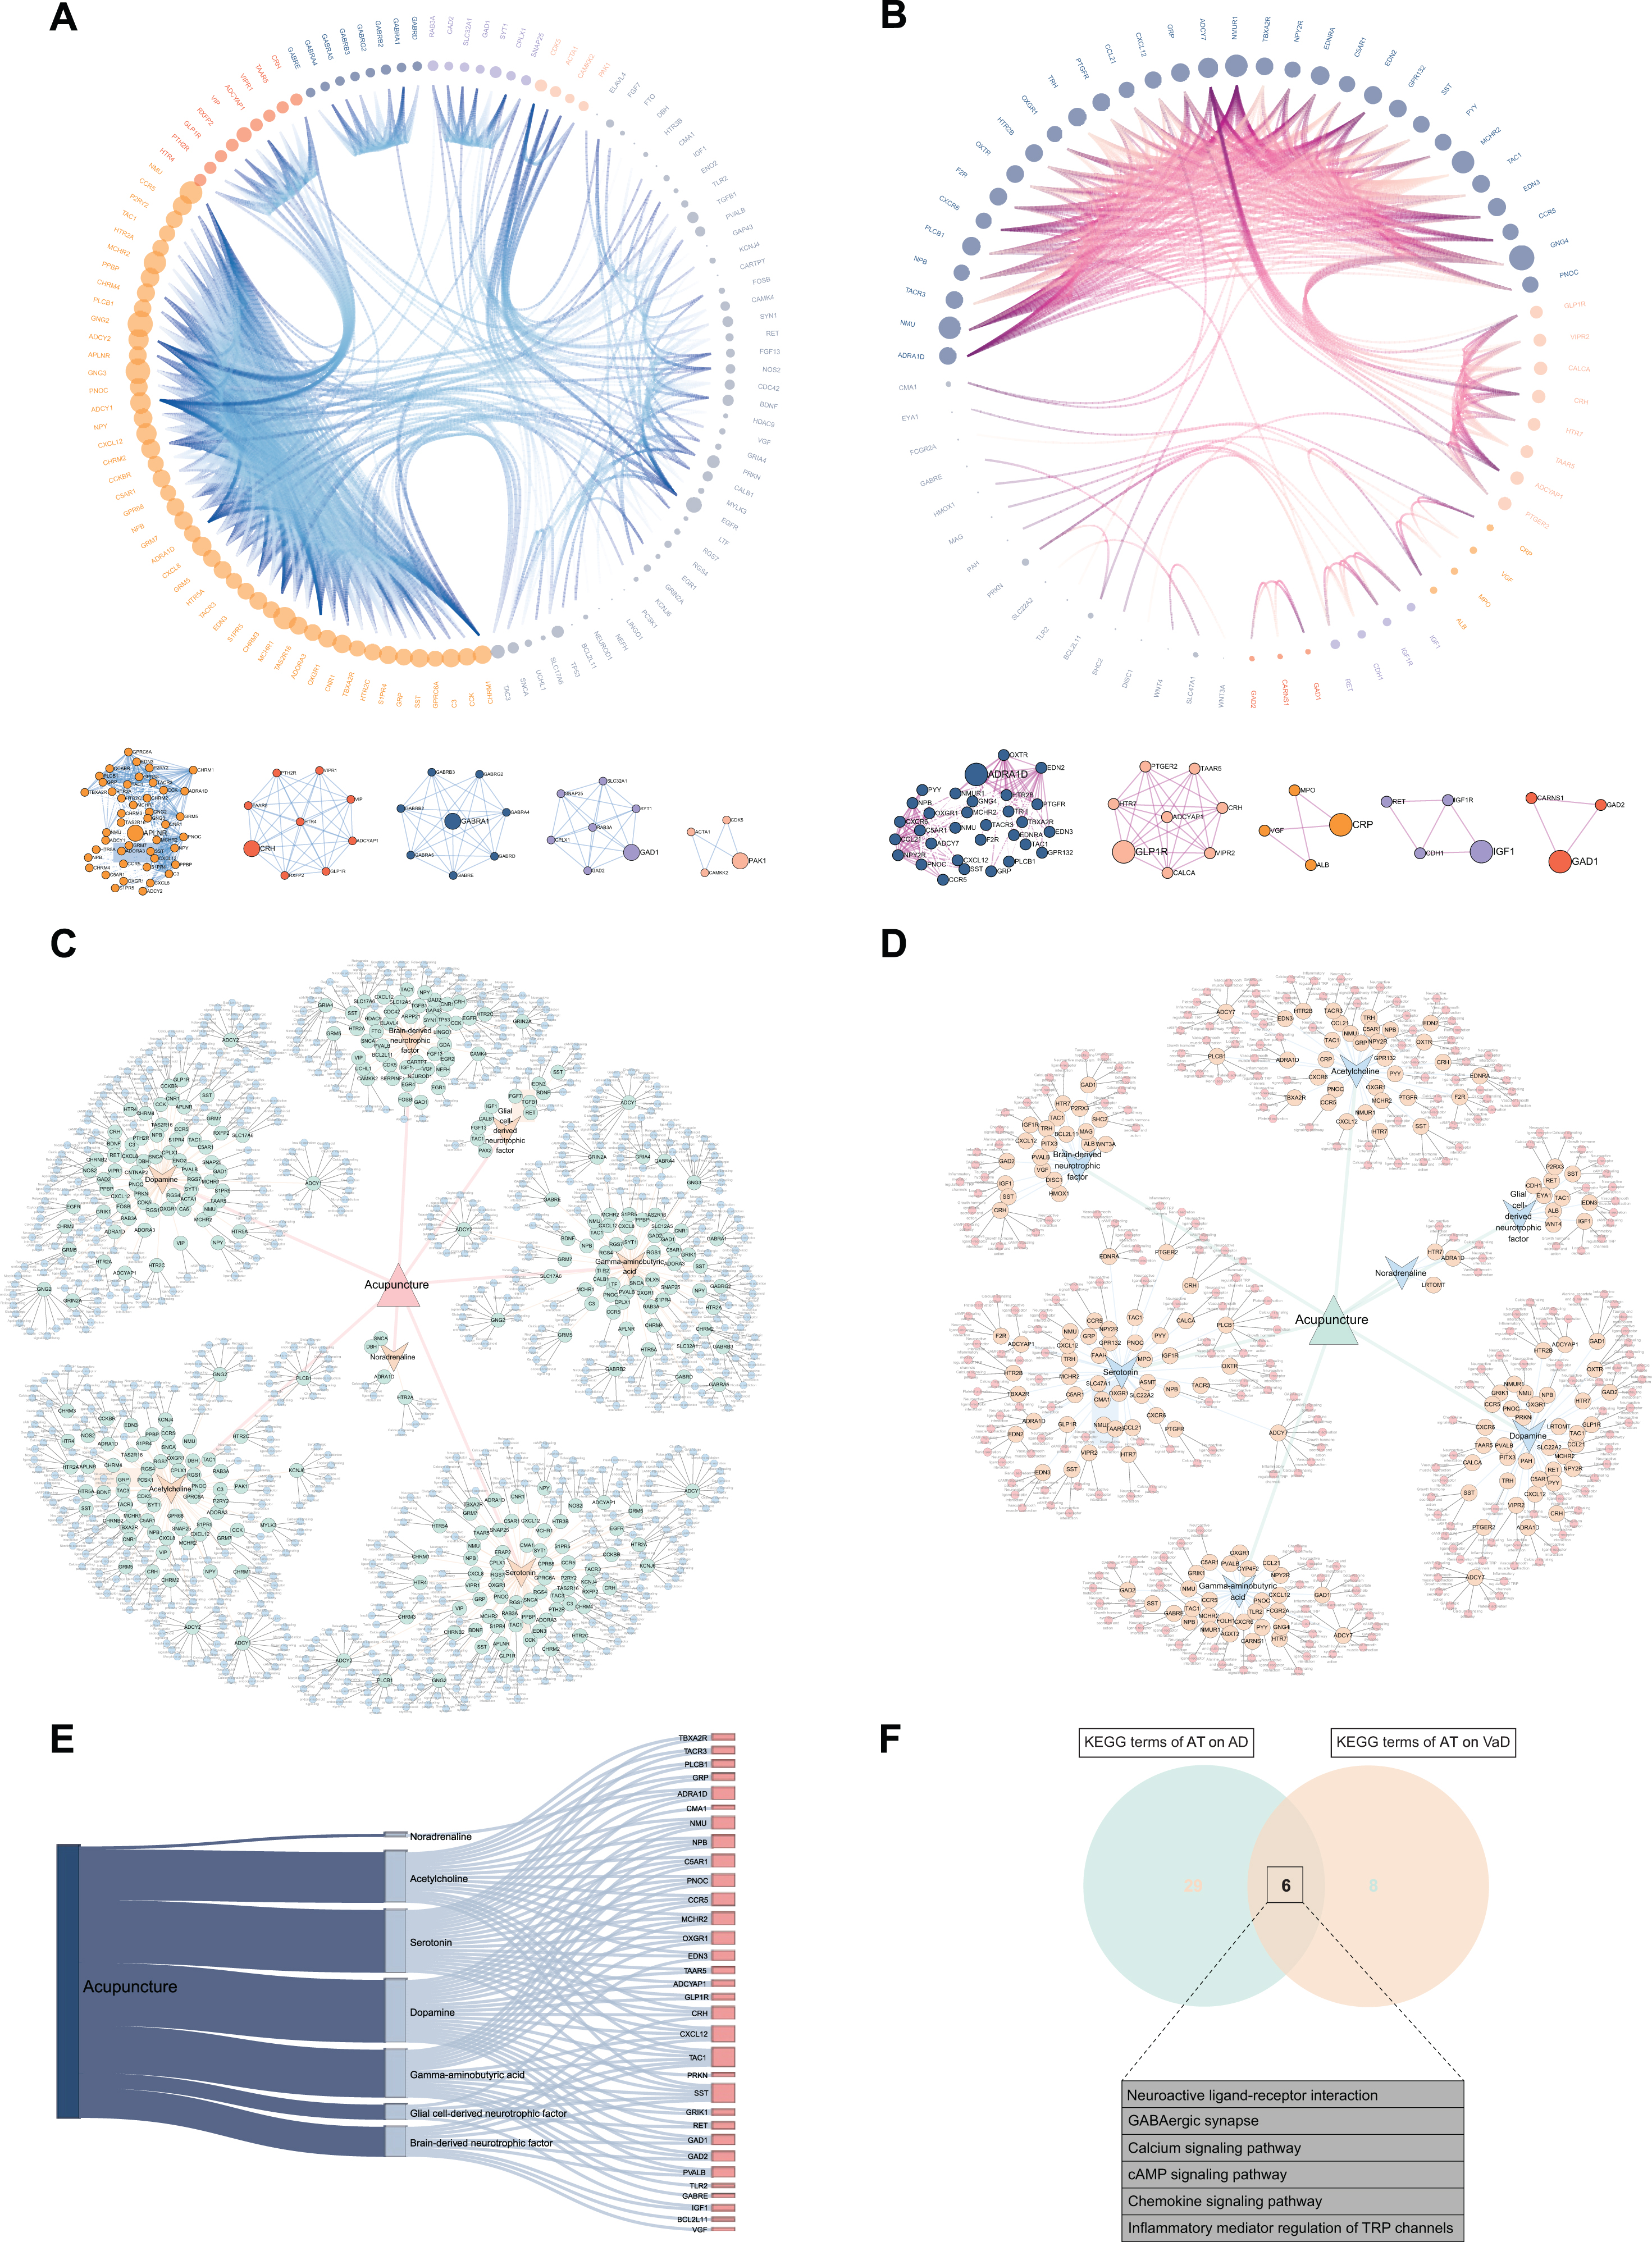 Construction of visual networks based on acupuncture therapeutic targets associated with Alzheimer’s disease (AD) and vascular dementia (VaD). A) PPI network and clustering sub-networks of acupuncture therapy (AT) on AD. In this network, the interaction of 118 targets in PPI network out of 132 acupuncture therapeutic targets on AD (ACAgenes) is displayed. According to the increasing degree value from 1.00 to 57.00, the size of nodes and the density of edges correspondingly increase, leading to gradual enhancement of the interaction intensity on targets, and 5 clustering networks driven by 5 hub genes are further identified. B) PPI network and clustering sub-networks of AT on VaD. In this network, the interaction of 66 targets in PPI network out of 76 acupuncture therapeutic targets on VaD (ACVgenes) is displayed. The degree values of targets increase from 1.00 to 38.00, and 5 clustering networks driven by 5 hub genes are further identified. C) Global network of AT on AD. In this network, the associations of the 7 acupuncture active components, 132 ACAgenes, and the Kyoto Encyclopedia of Genes and Genomes (KEGG) pathways related to each target are systematically displayed. D) Global network of AT on VaD. In this network, the associations of the 7 acupuncture active components, 76 ACVgenes, and the KEGG pathways related to each target are systematically displayed. E) Sankey diagram of the 32 mutual targets from ACAgenes and ACVgenes. F) Venn diagram depicts KEGG terms sharing of AT on AD and VaD.